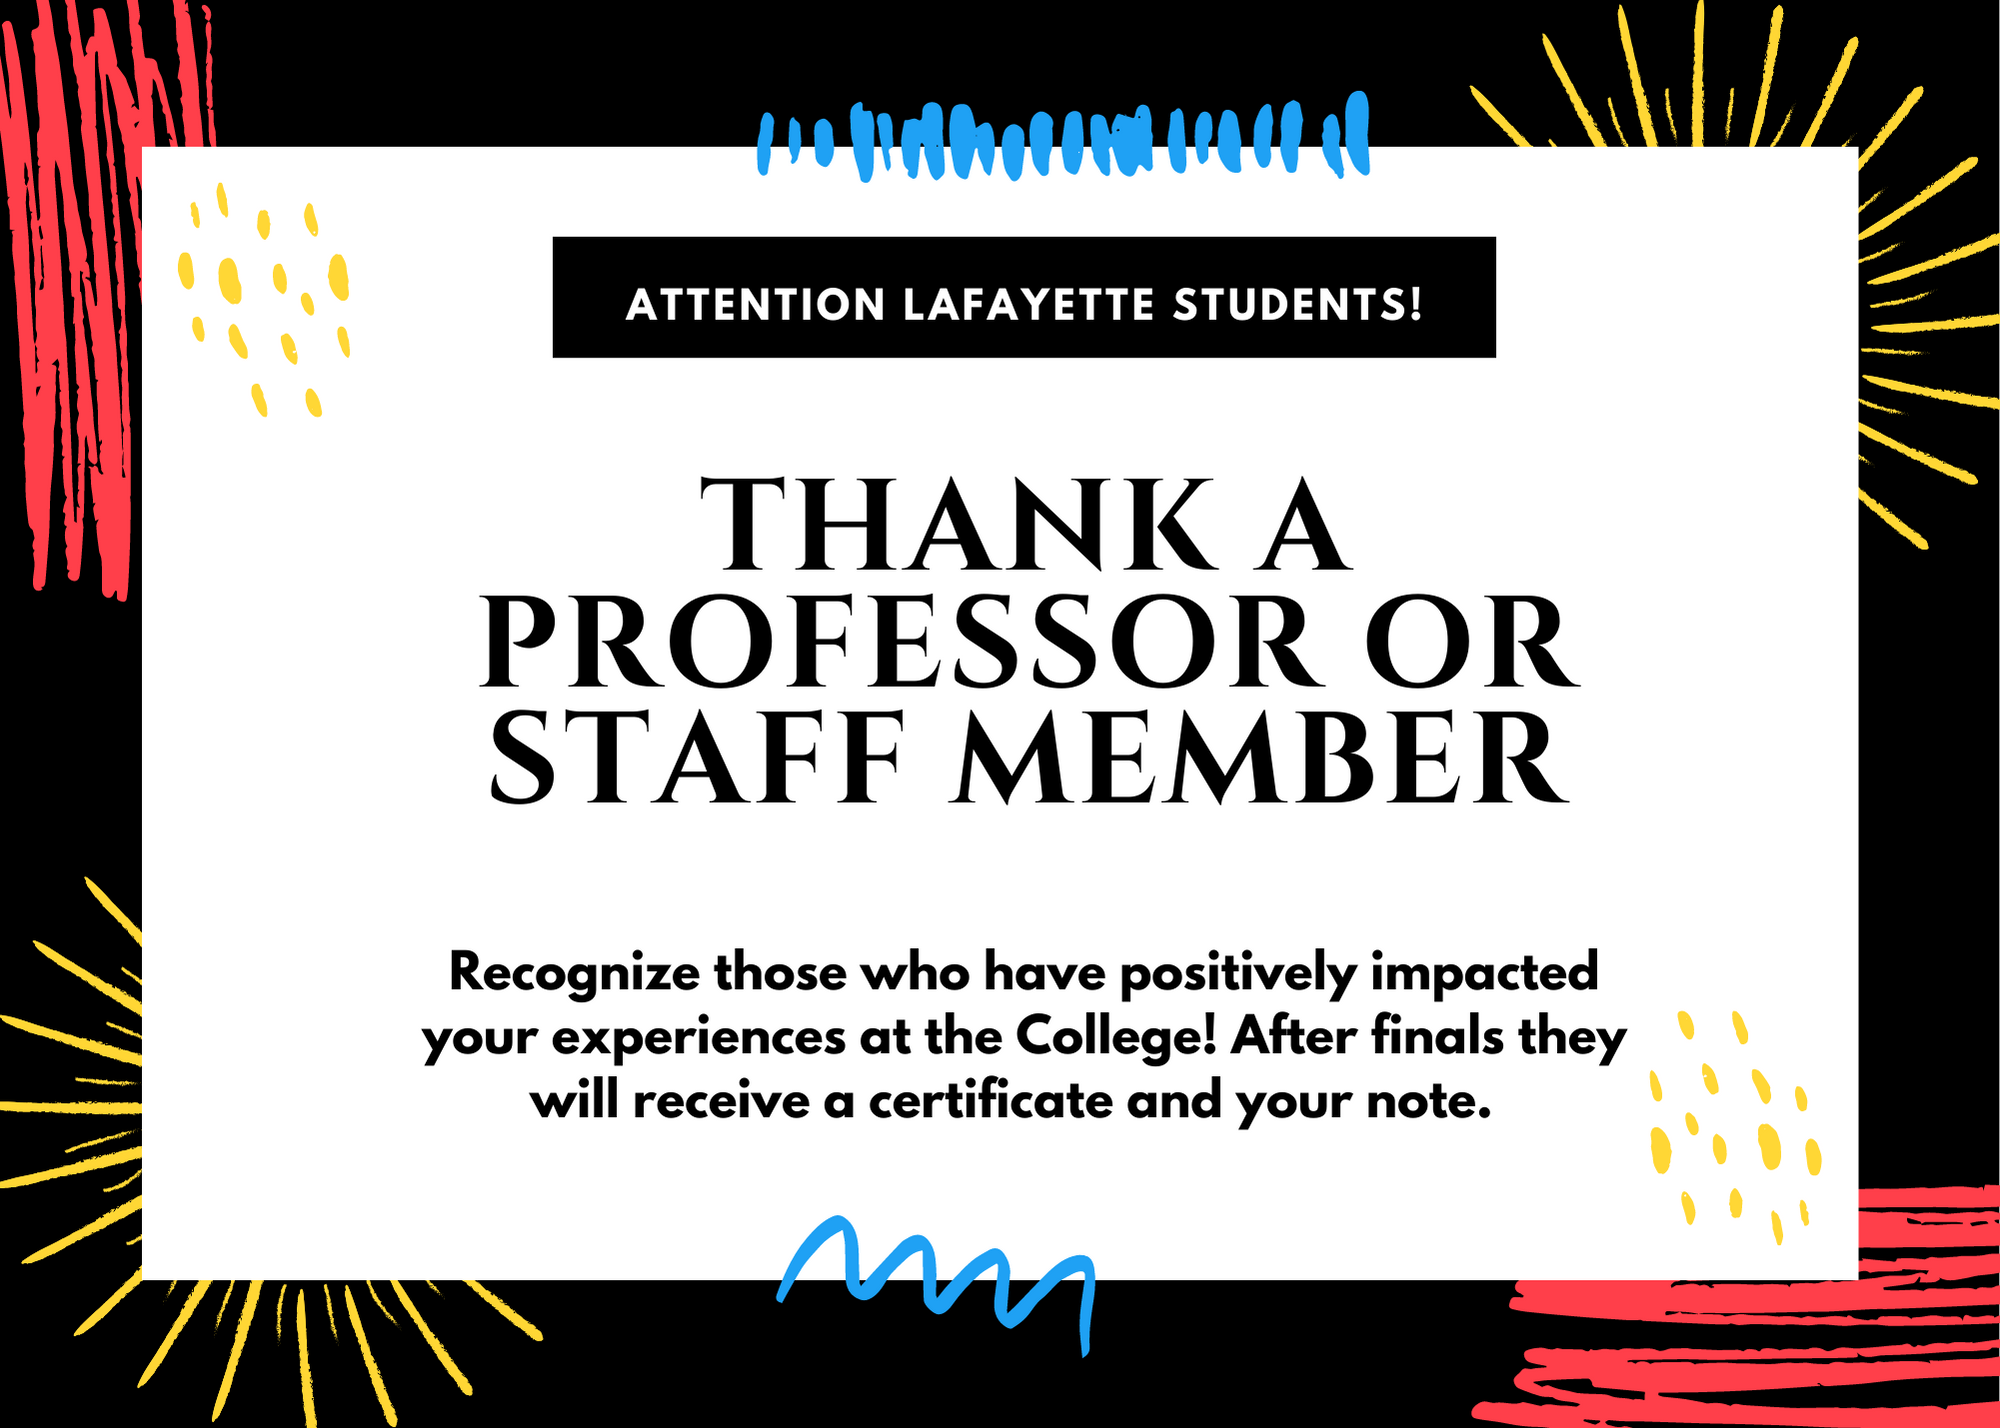 Thank a Professor or Staff Member Note